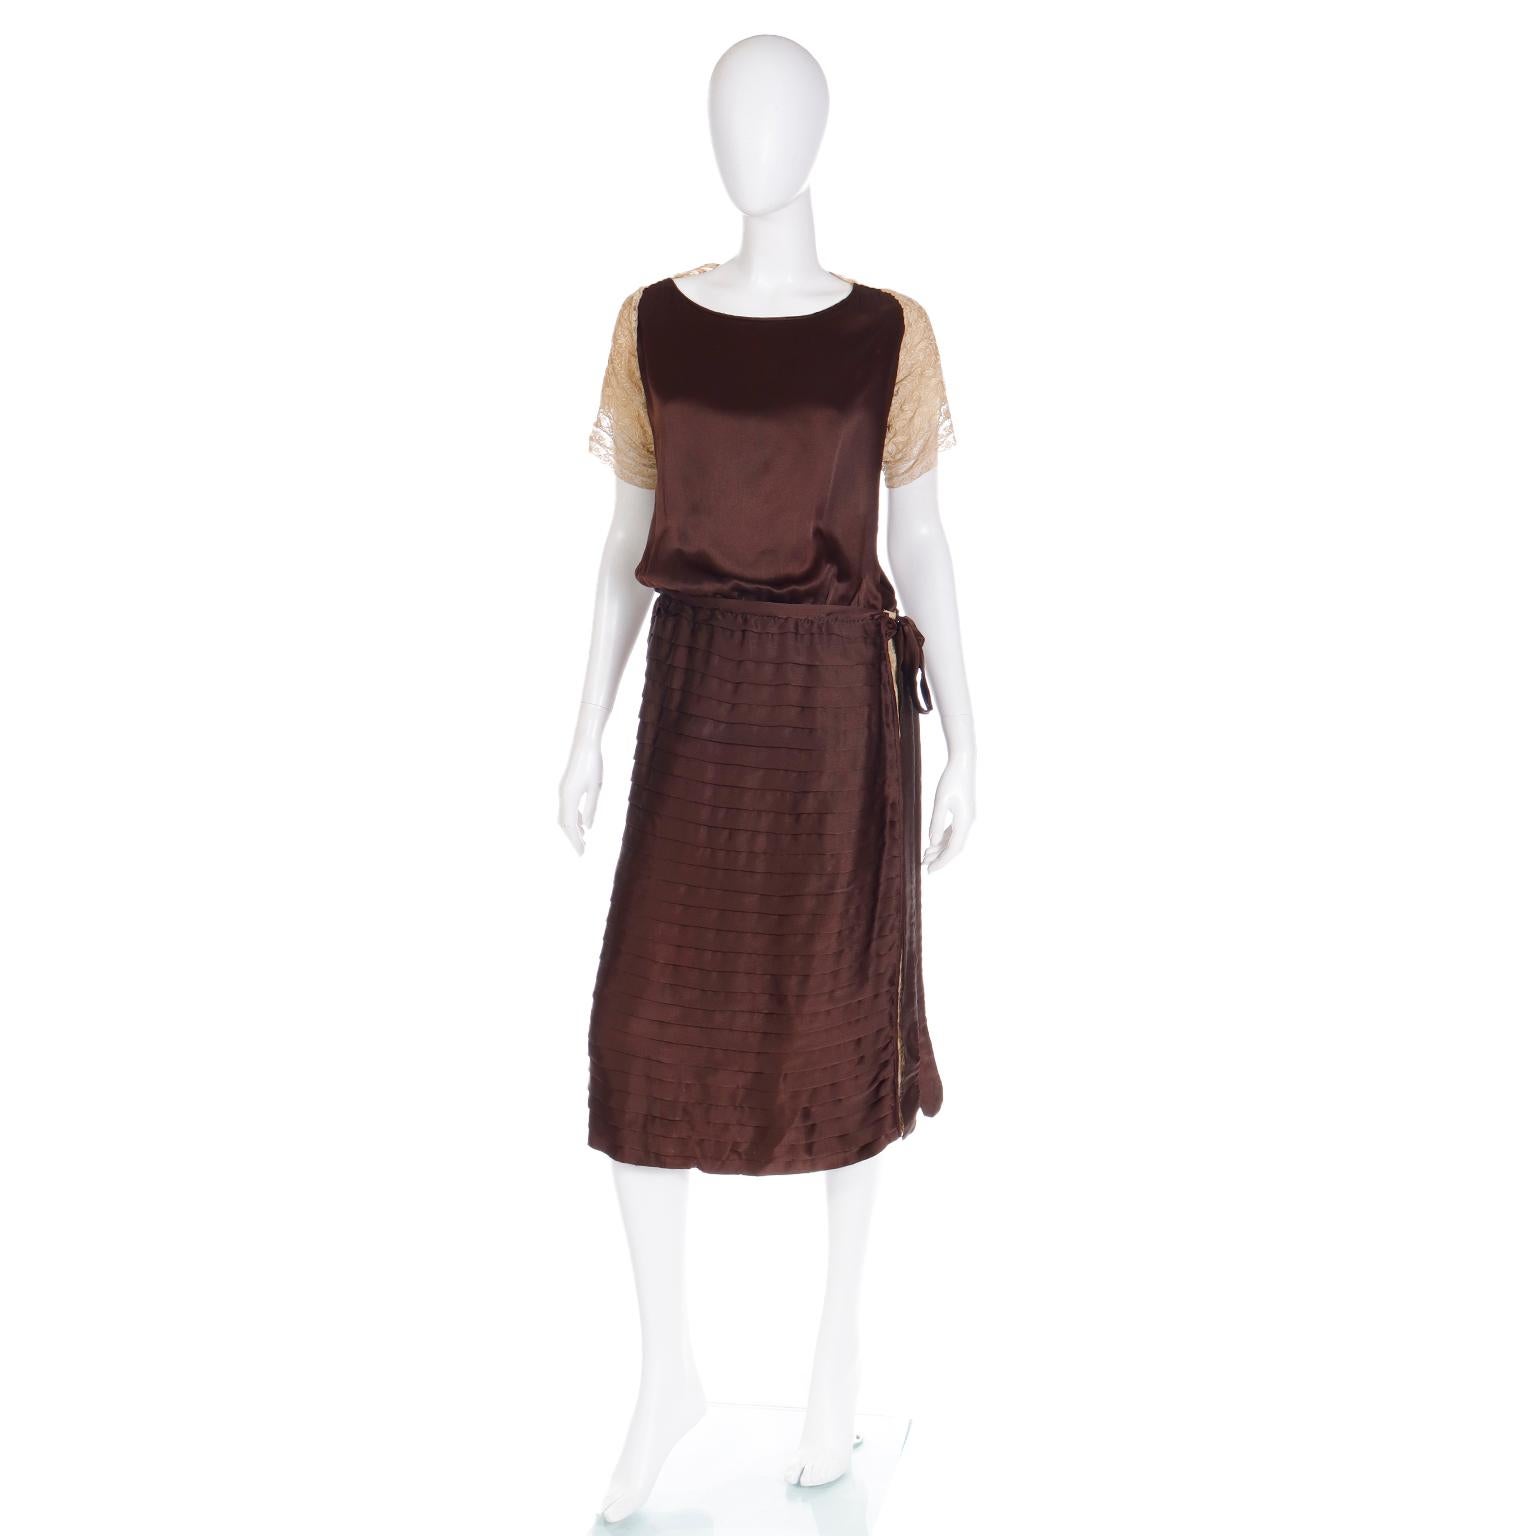 This beautifully made vintage 1920s dress is in a dark chocolate brown silk with cream lace on the sleeves and upper back. We love the way the dress has horizontal flat pleats along the entire skirt portion and a side seam with insert lace. There is